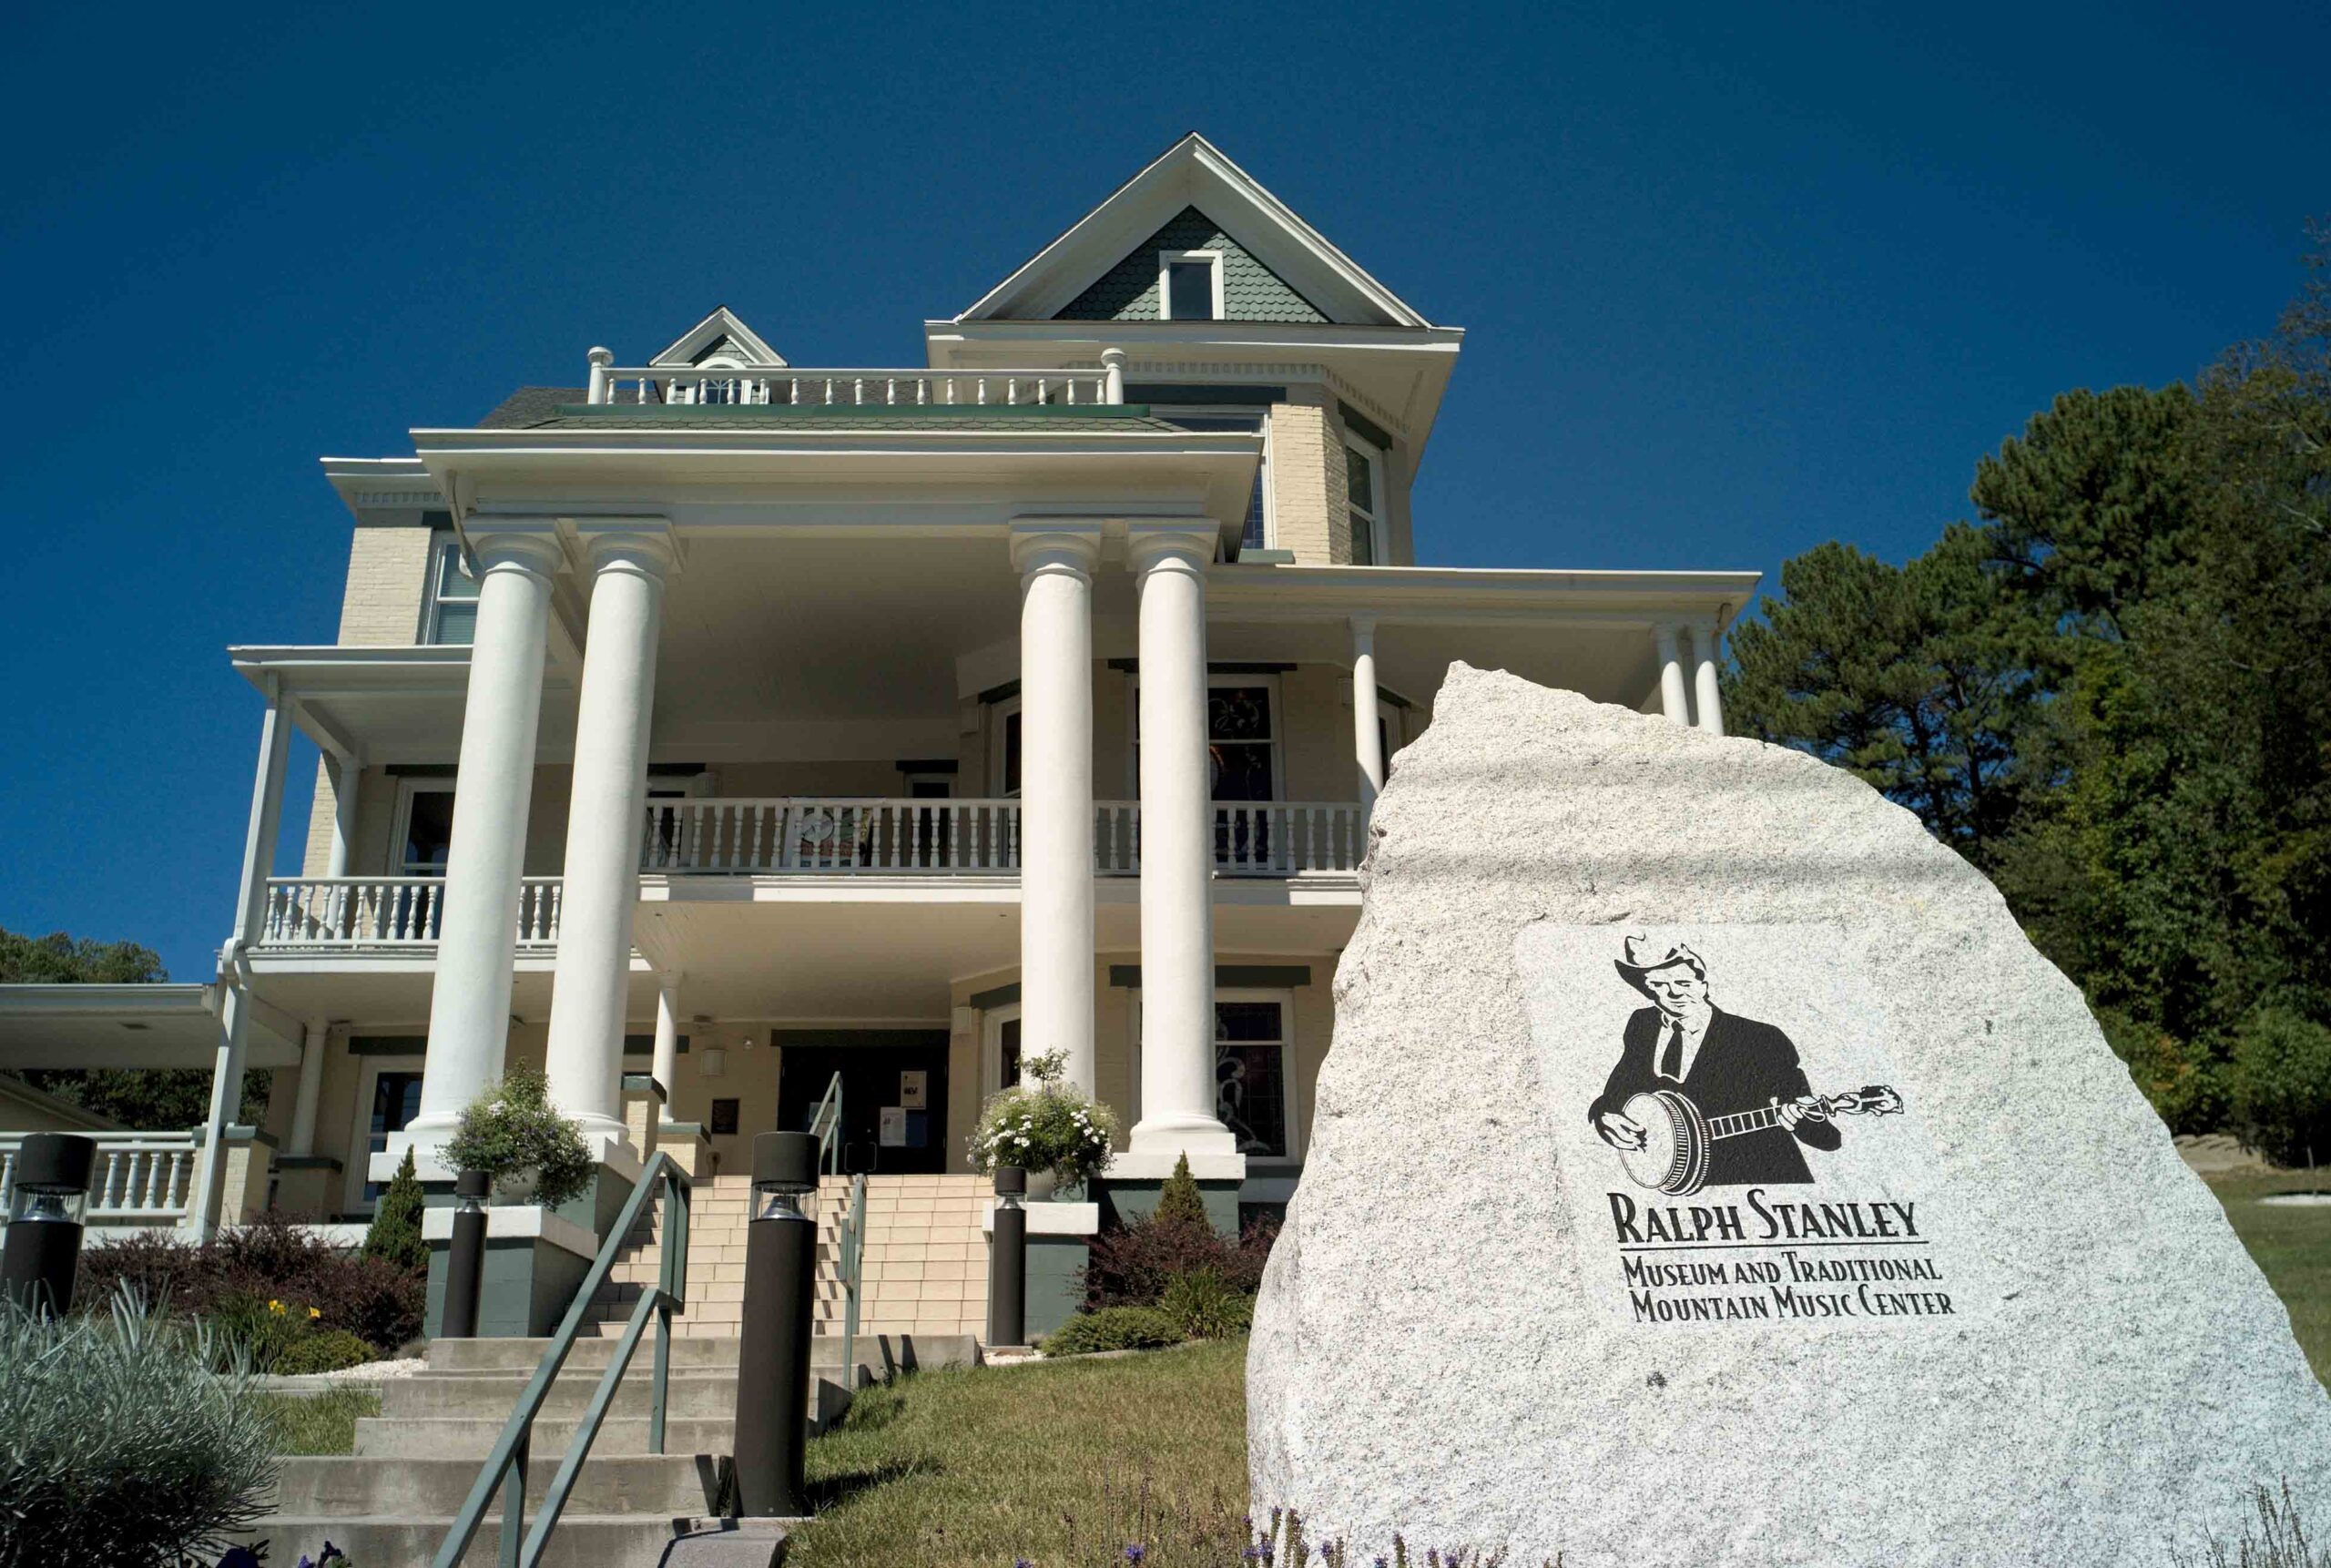 The Ralph Stanley Museum and Traditional Mountain Music Center